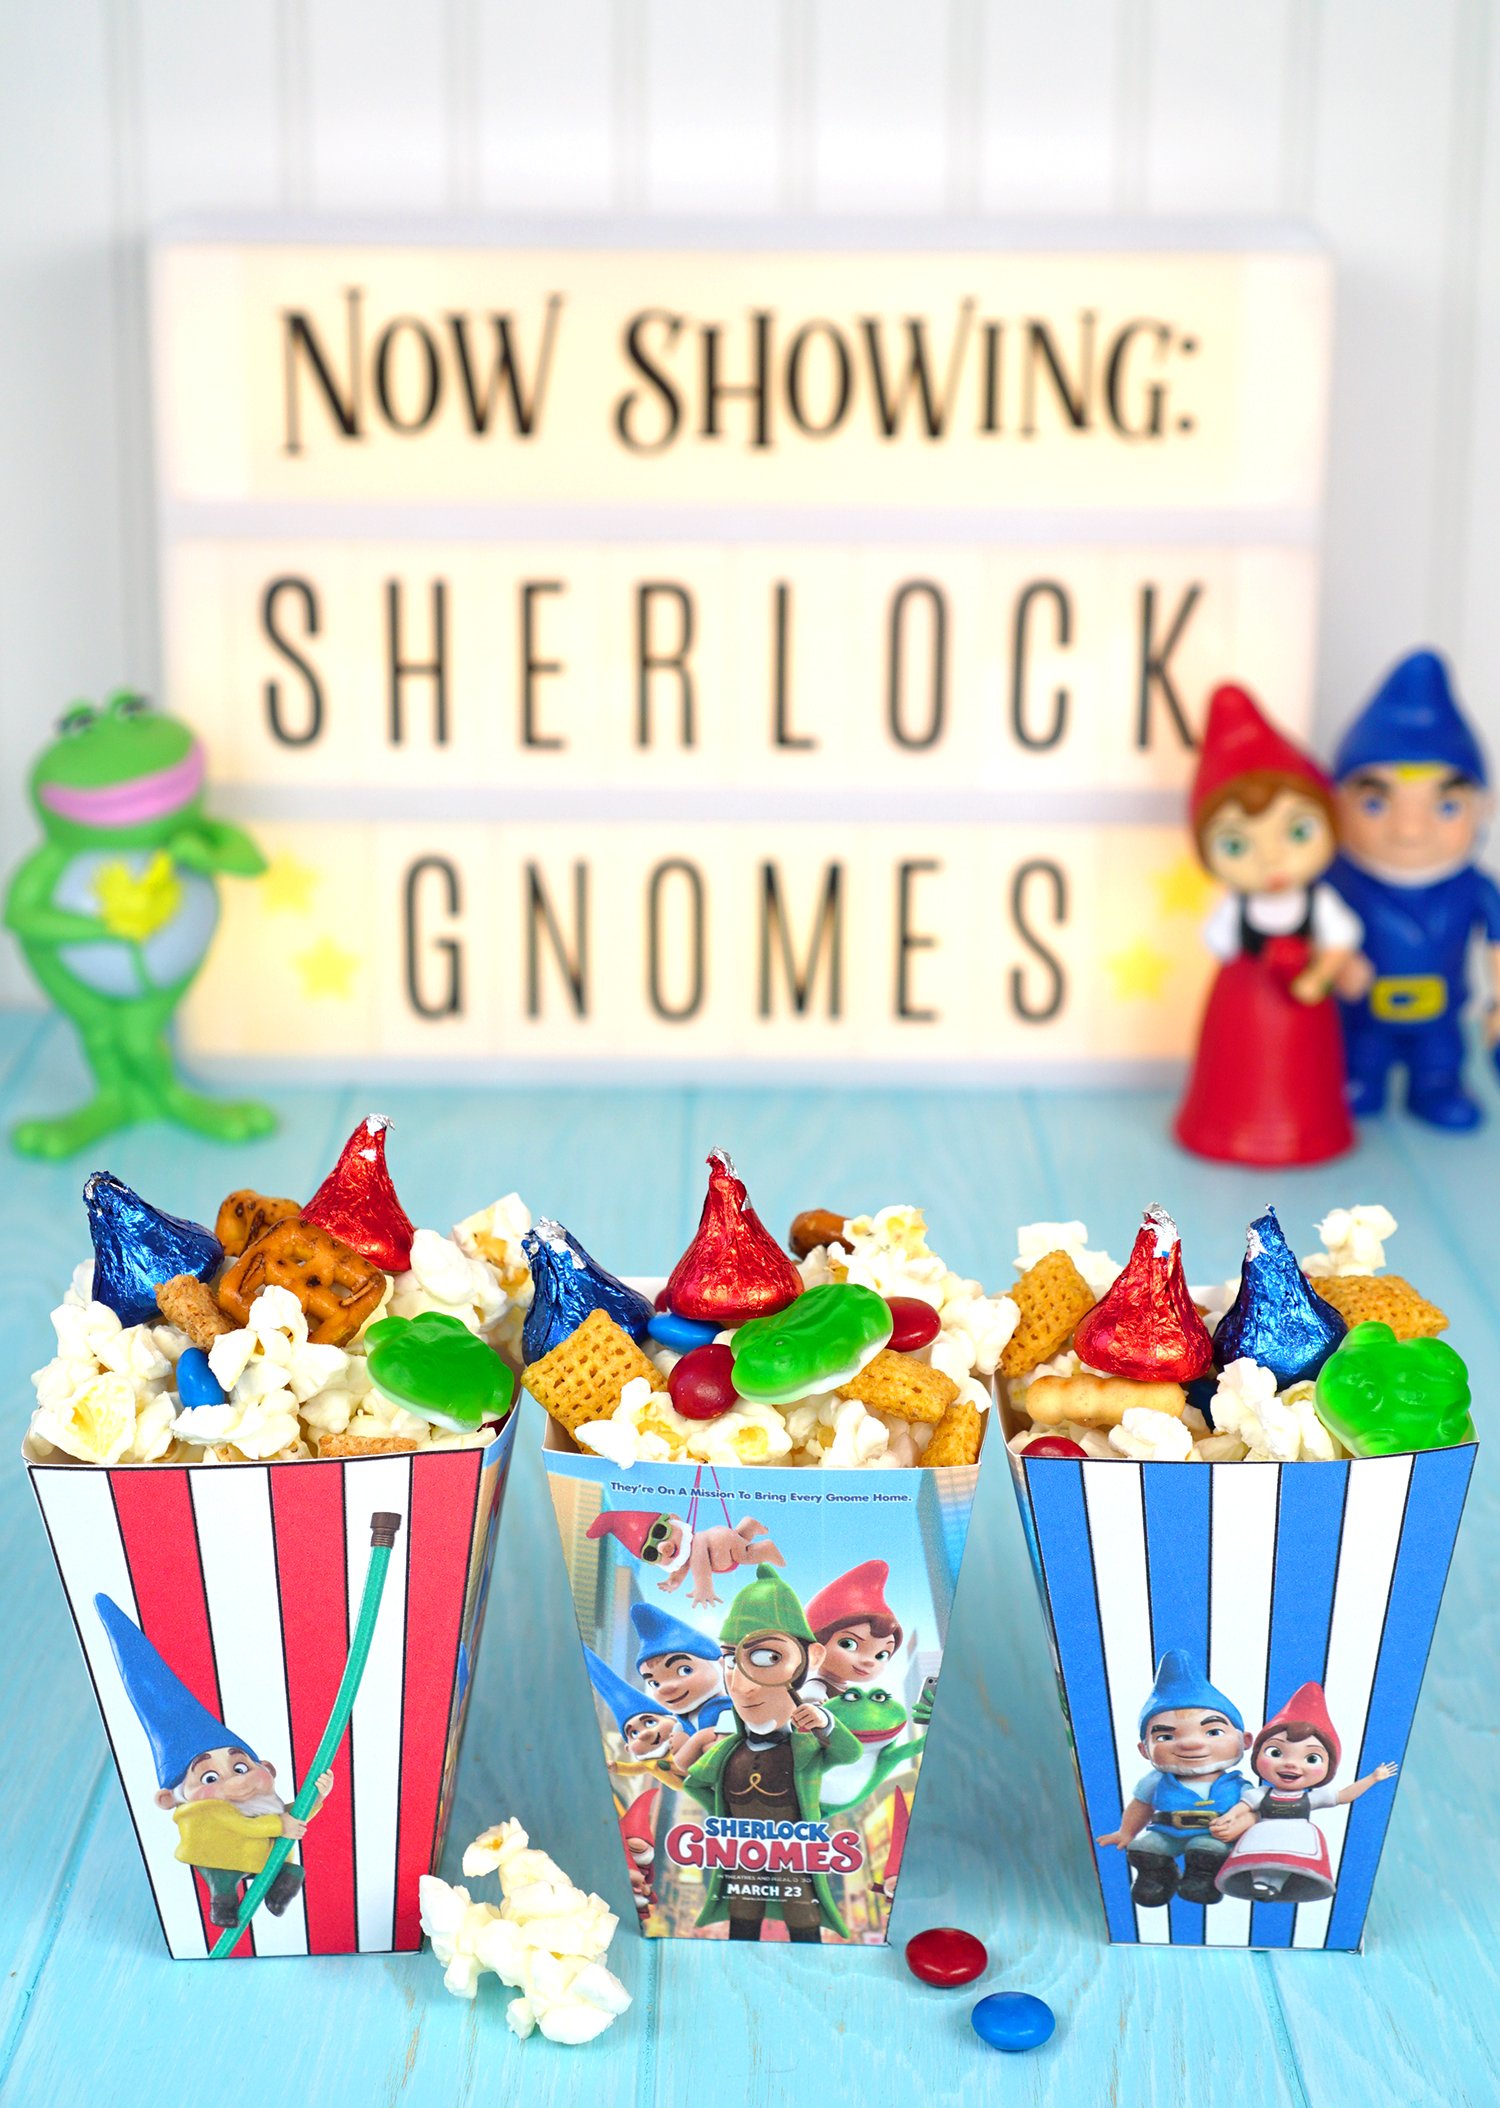 Sherlock Gnomes Snack Mix and now showing sign with toys